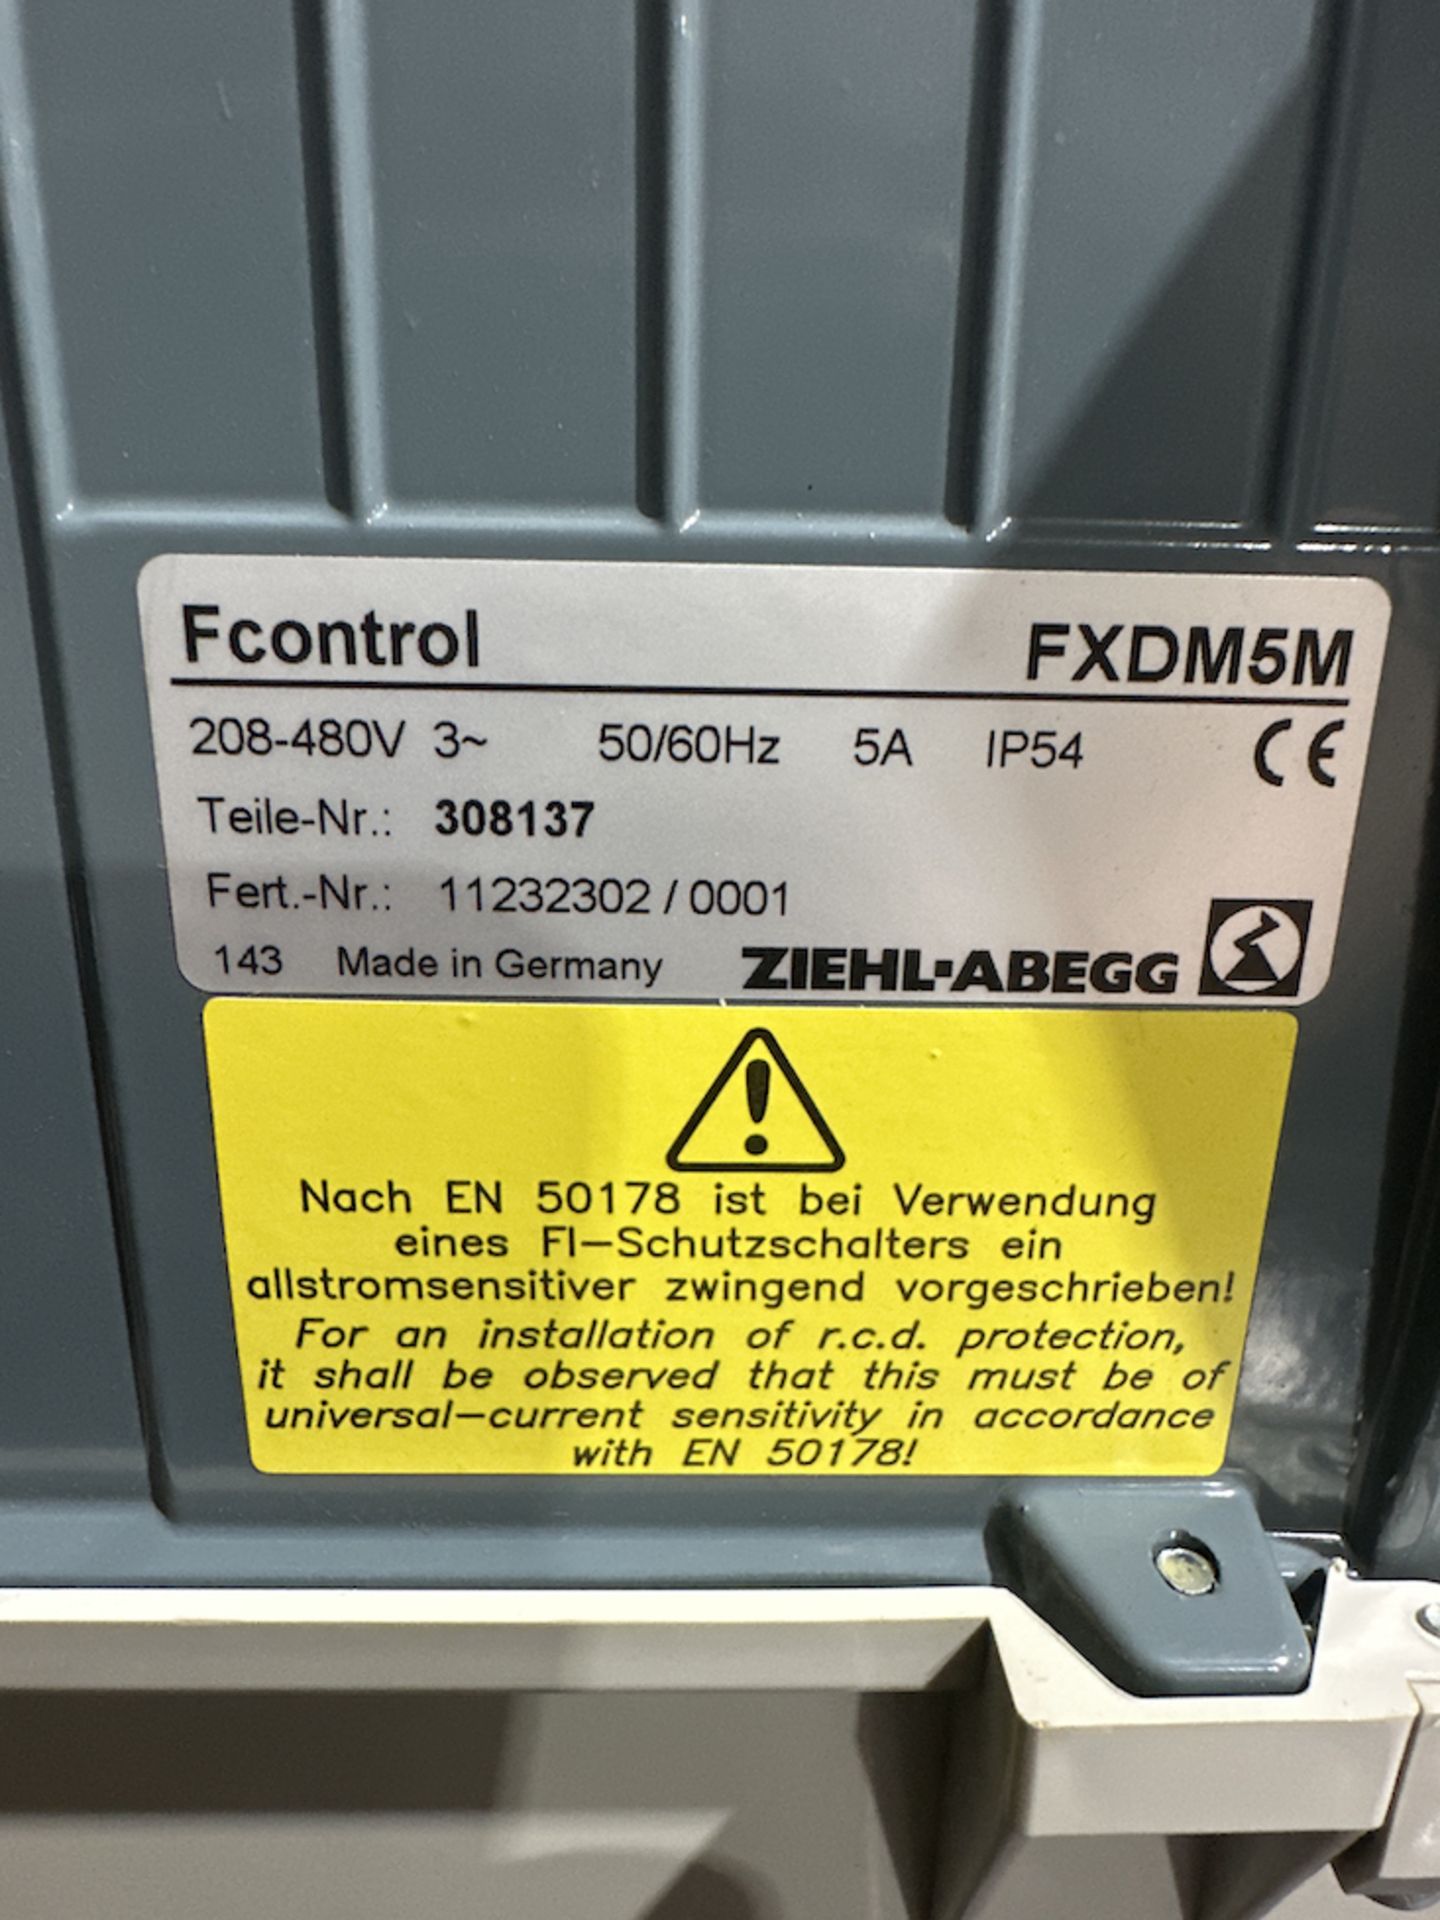 ZIEHL-ABEGG FXDM5M FAN VARIABLE SPEED DRIVE 208-480V 50/60Hz 5A - Image 4 of 4